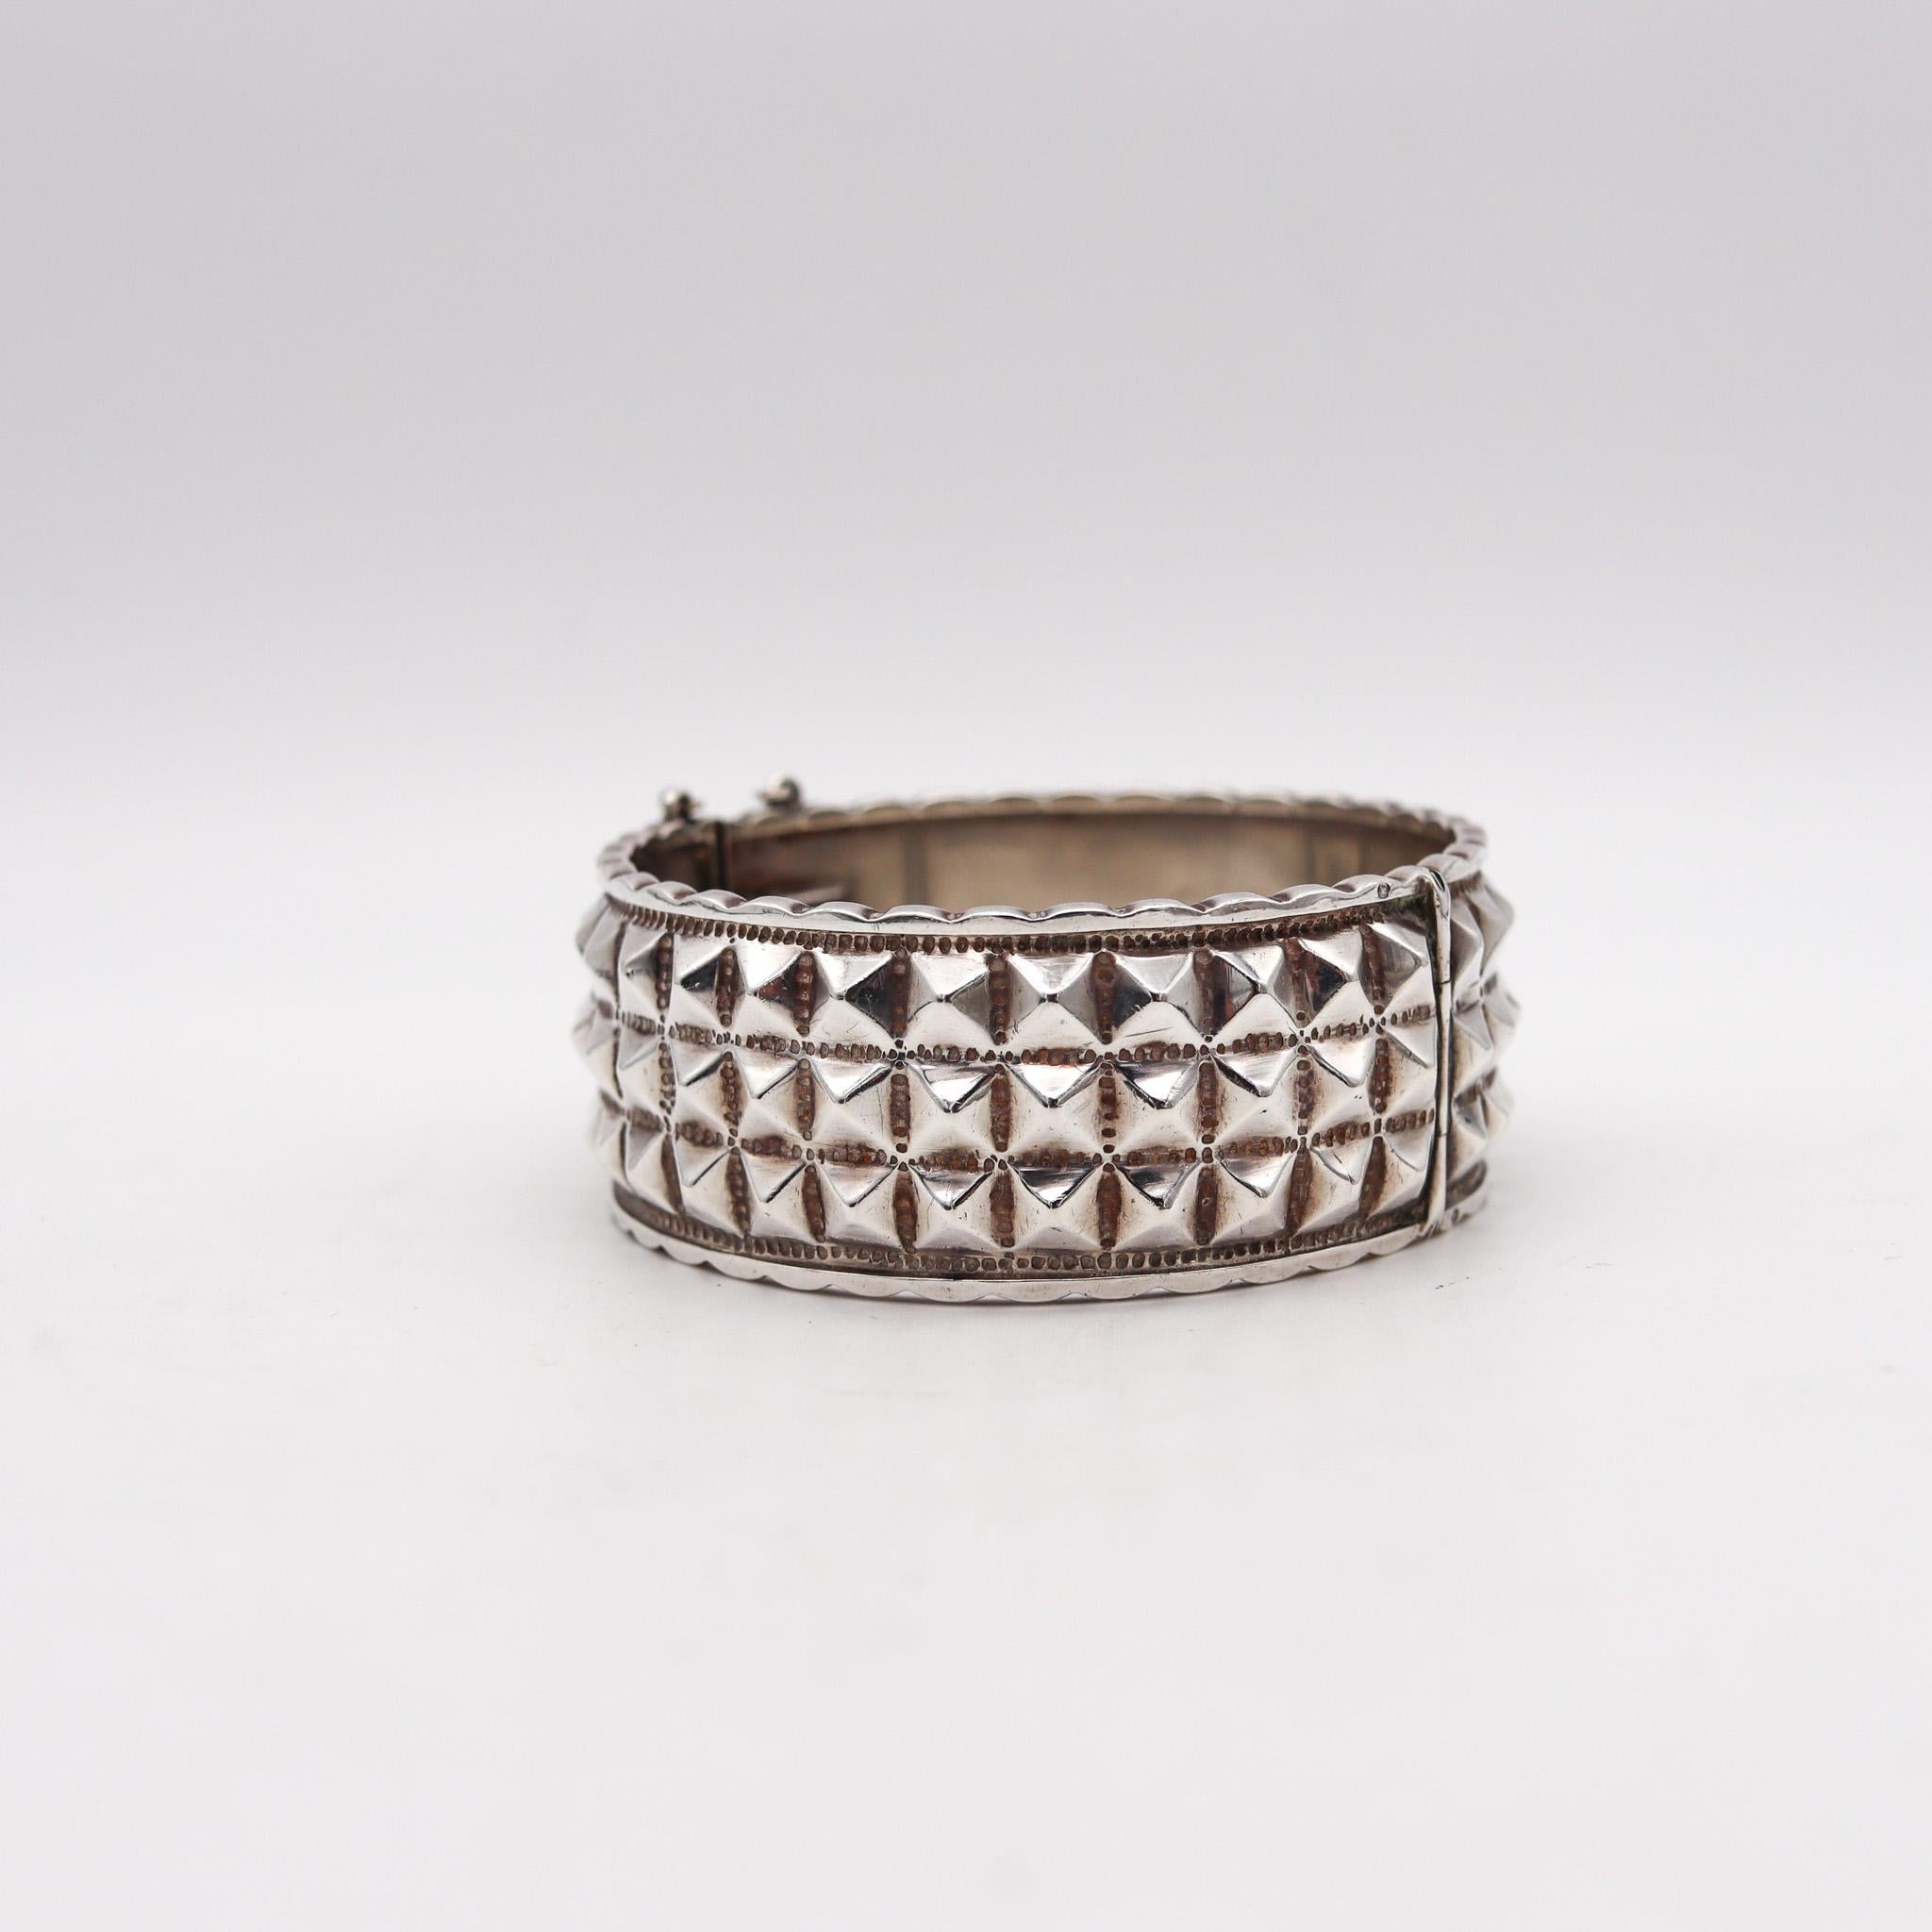 Rene Sitoleux 1935 Paris French Art Deco Geometric Bangle Bracelet In 800 Silver In Excellent Condition For Sale In Miami, FL